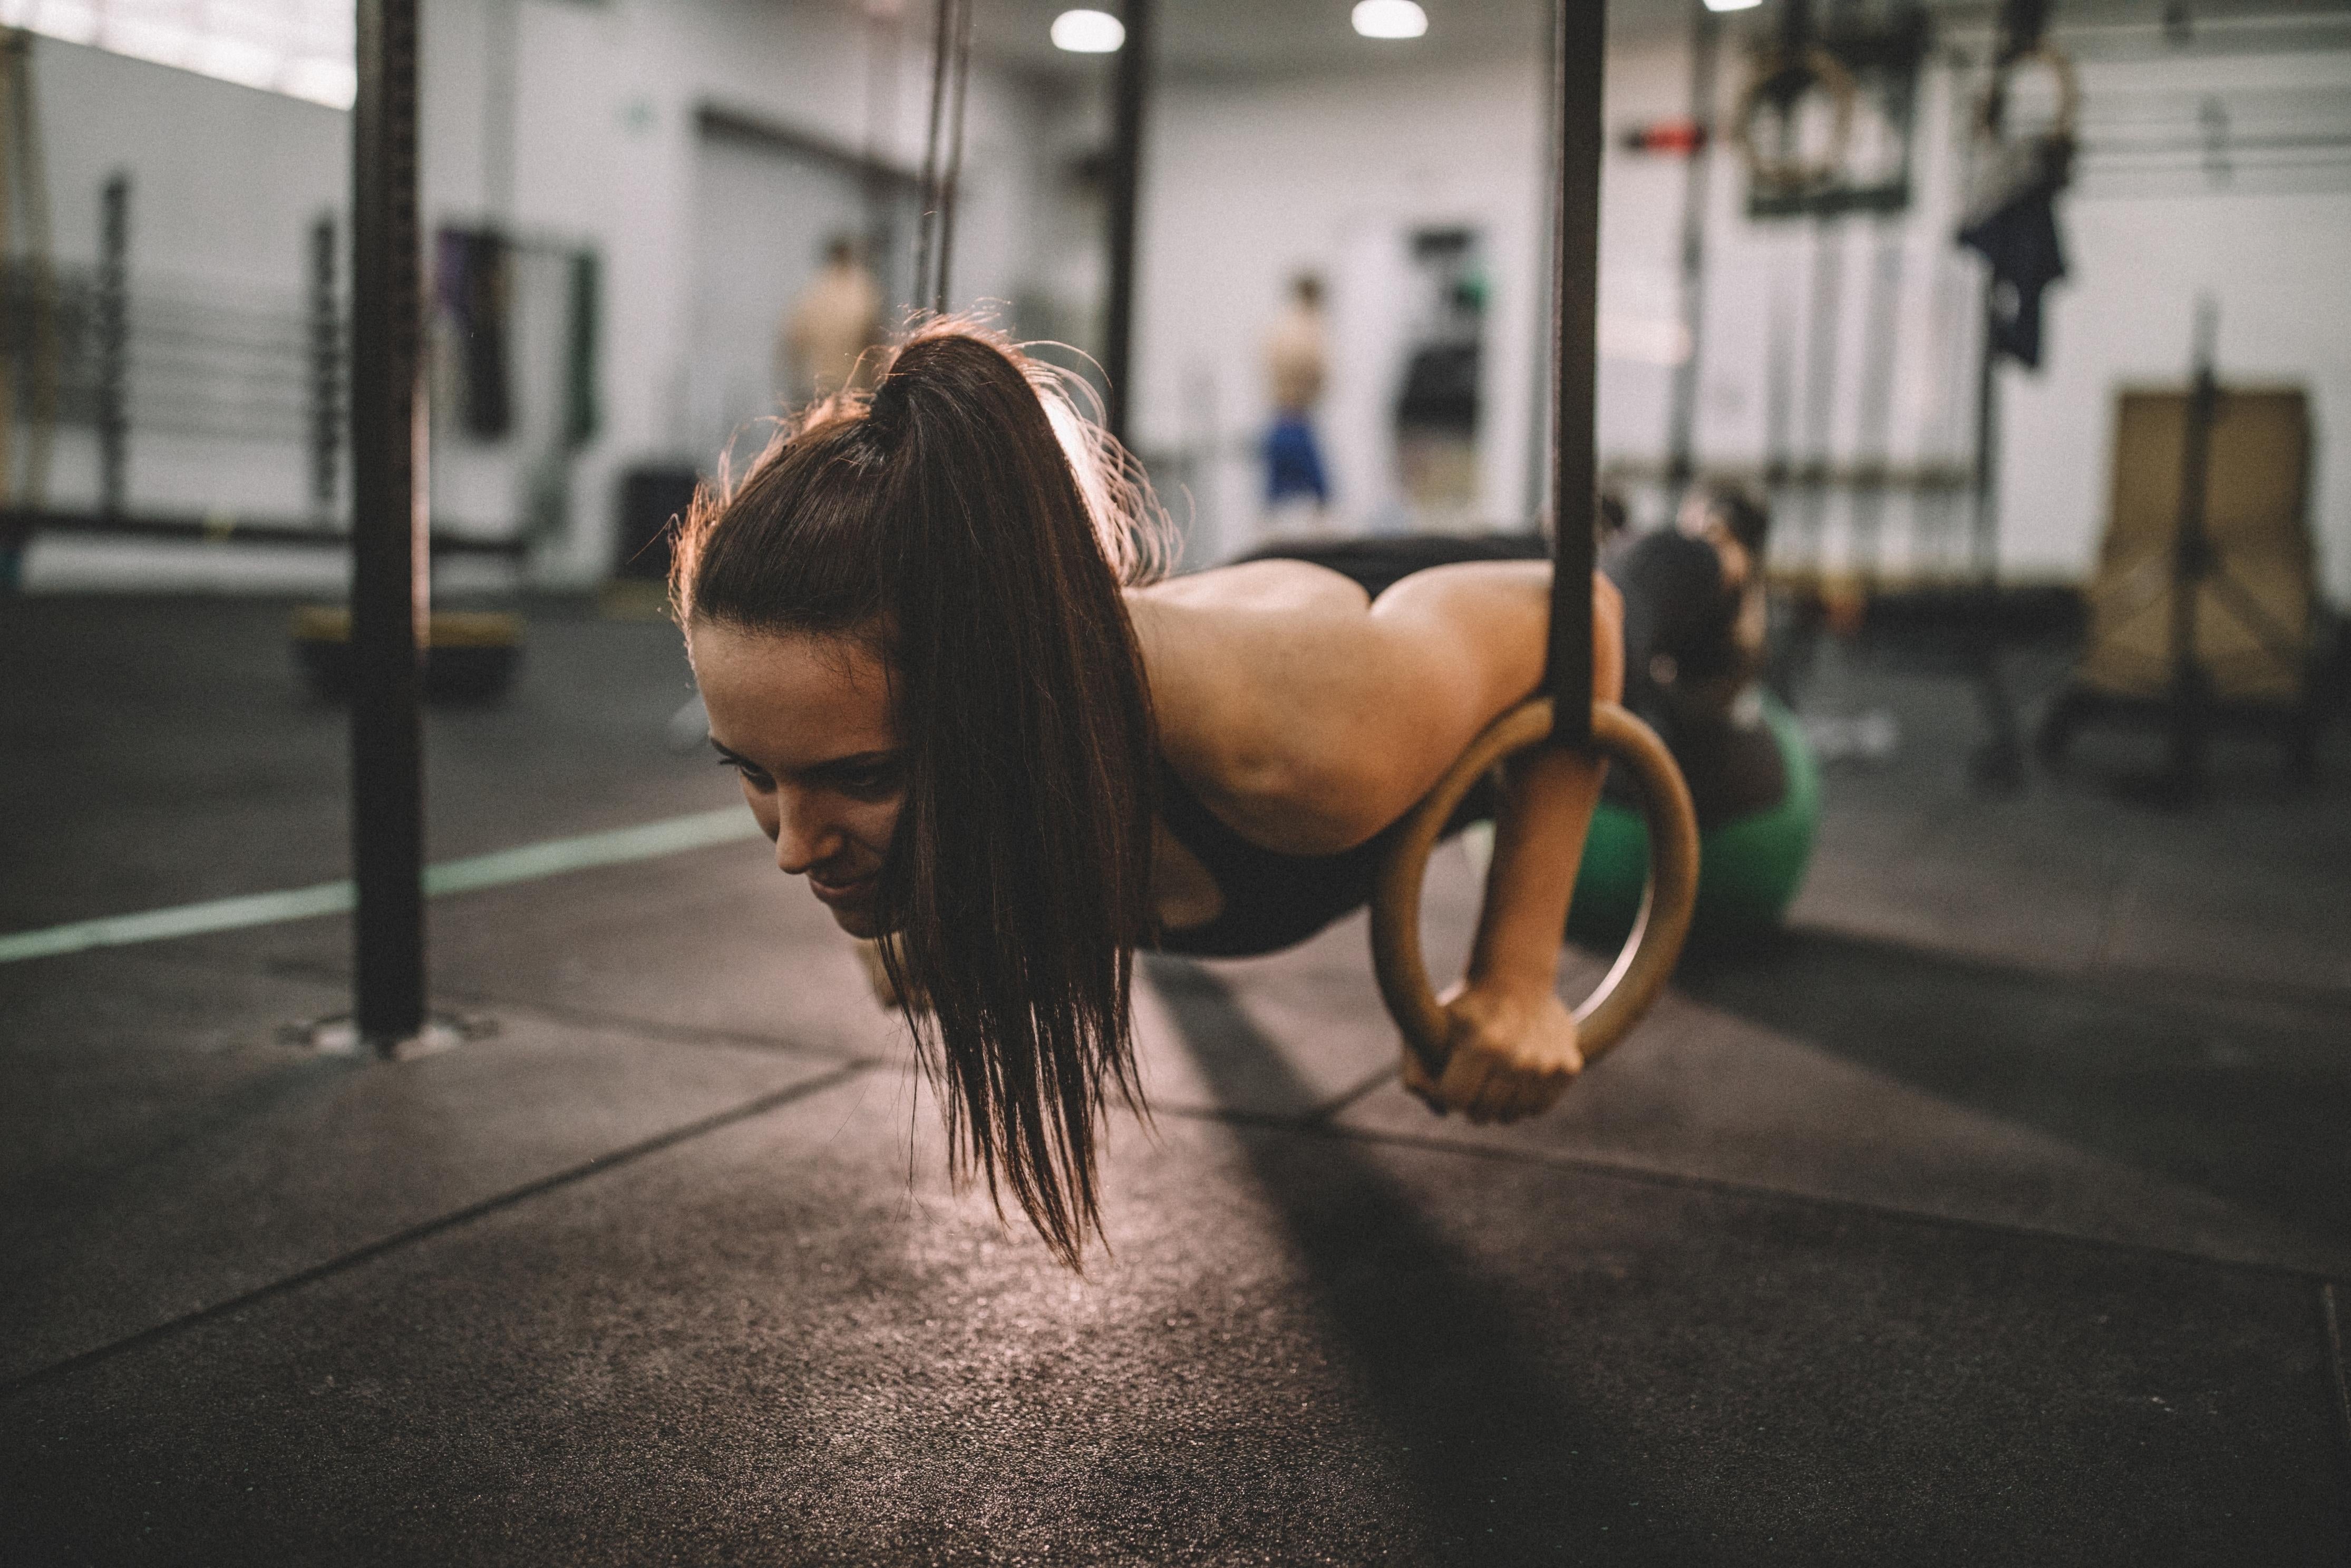 Woman doing a push up with gymnastic rings in a gym